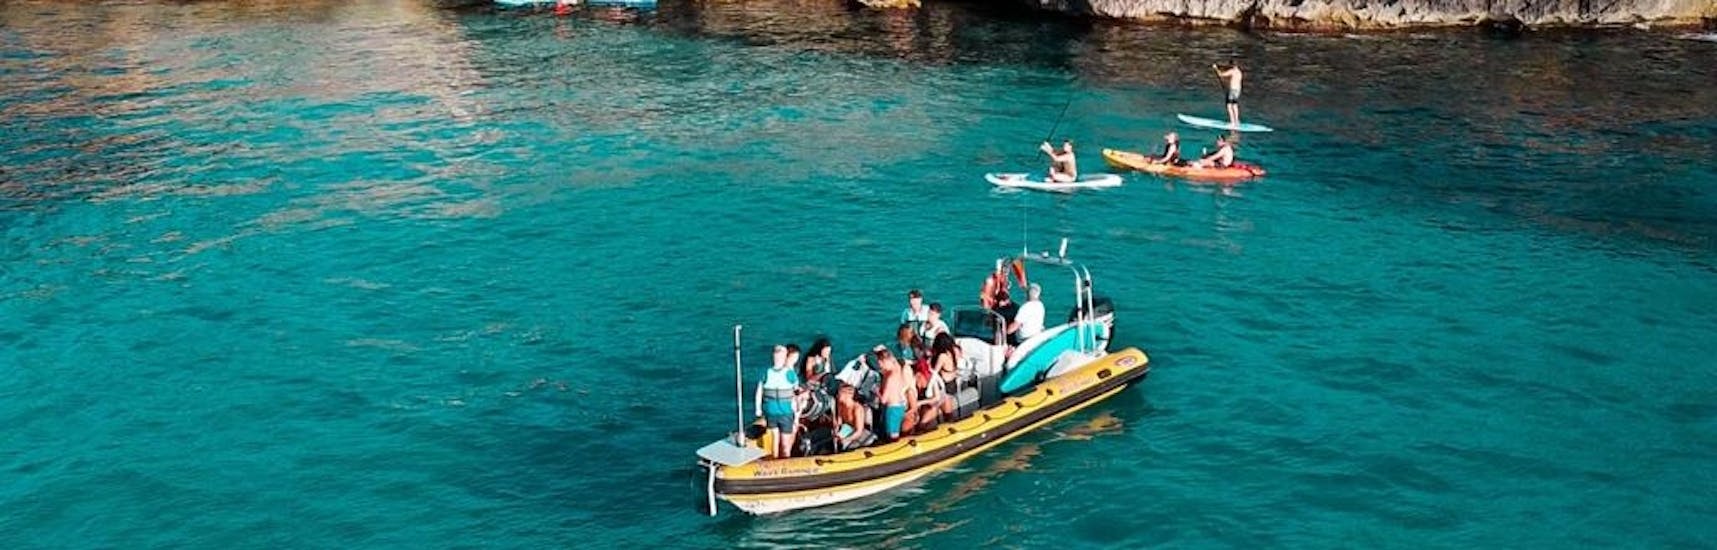 Participants on a speedboat stopping for a swim in the turquoise waters in Alcudia Bay during a boat trip from Can Picafort to Llevant Natural Park with North Coast Adventure Mallorca.